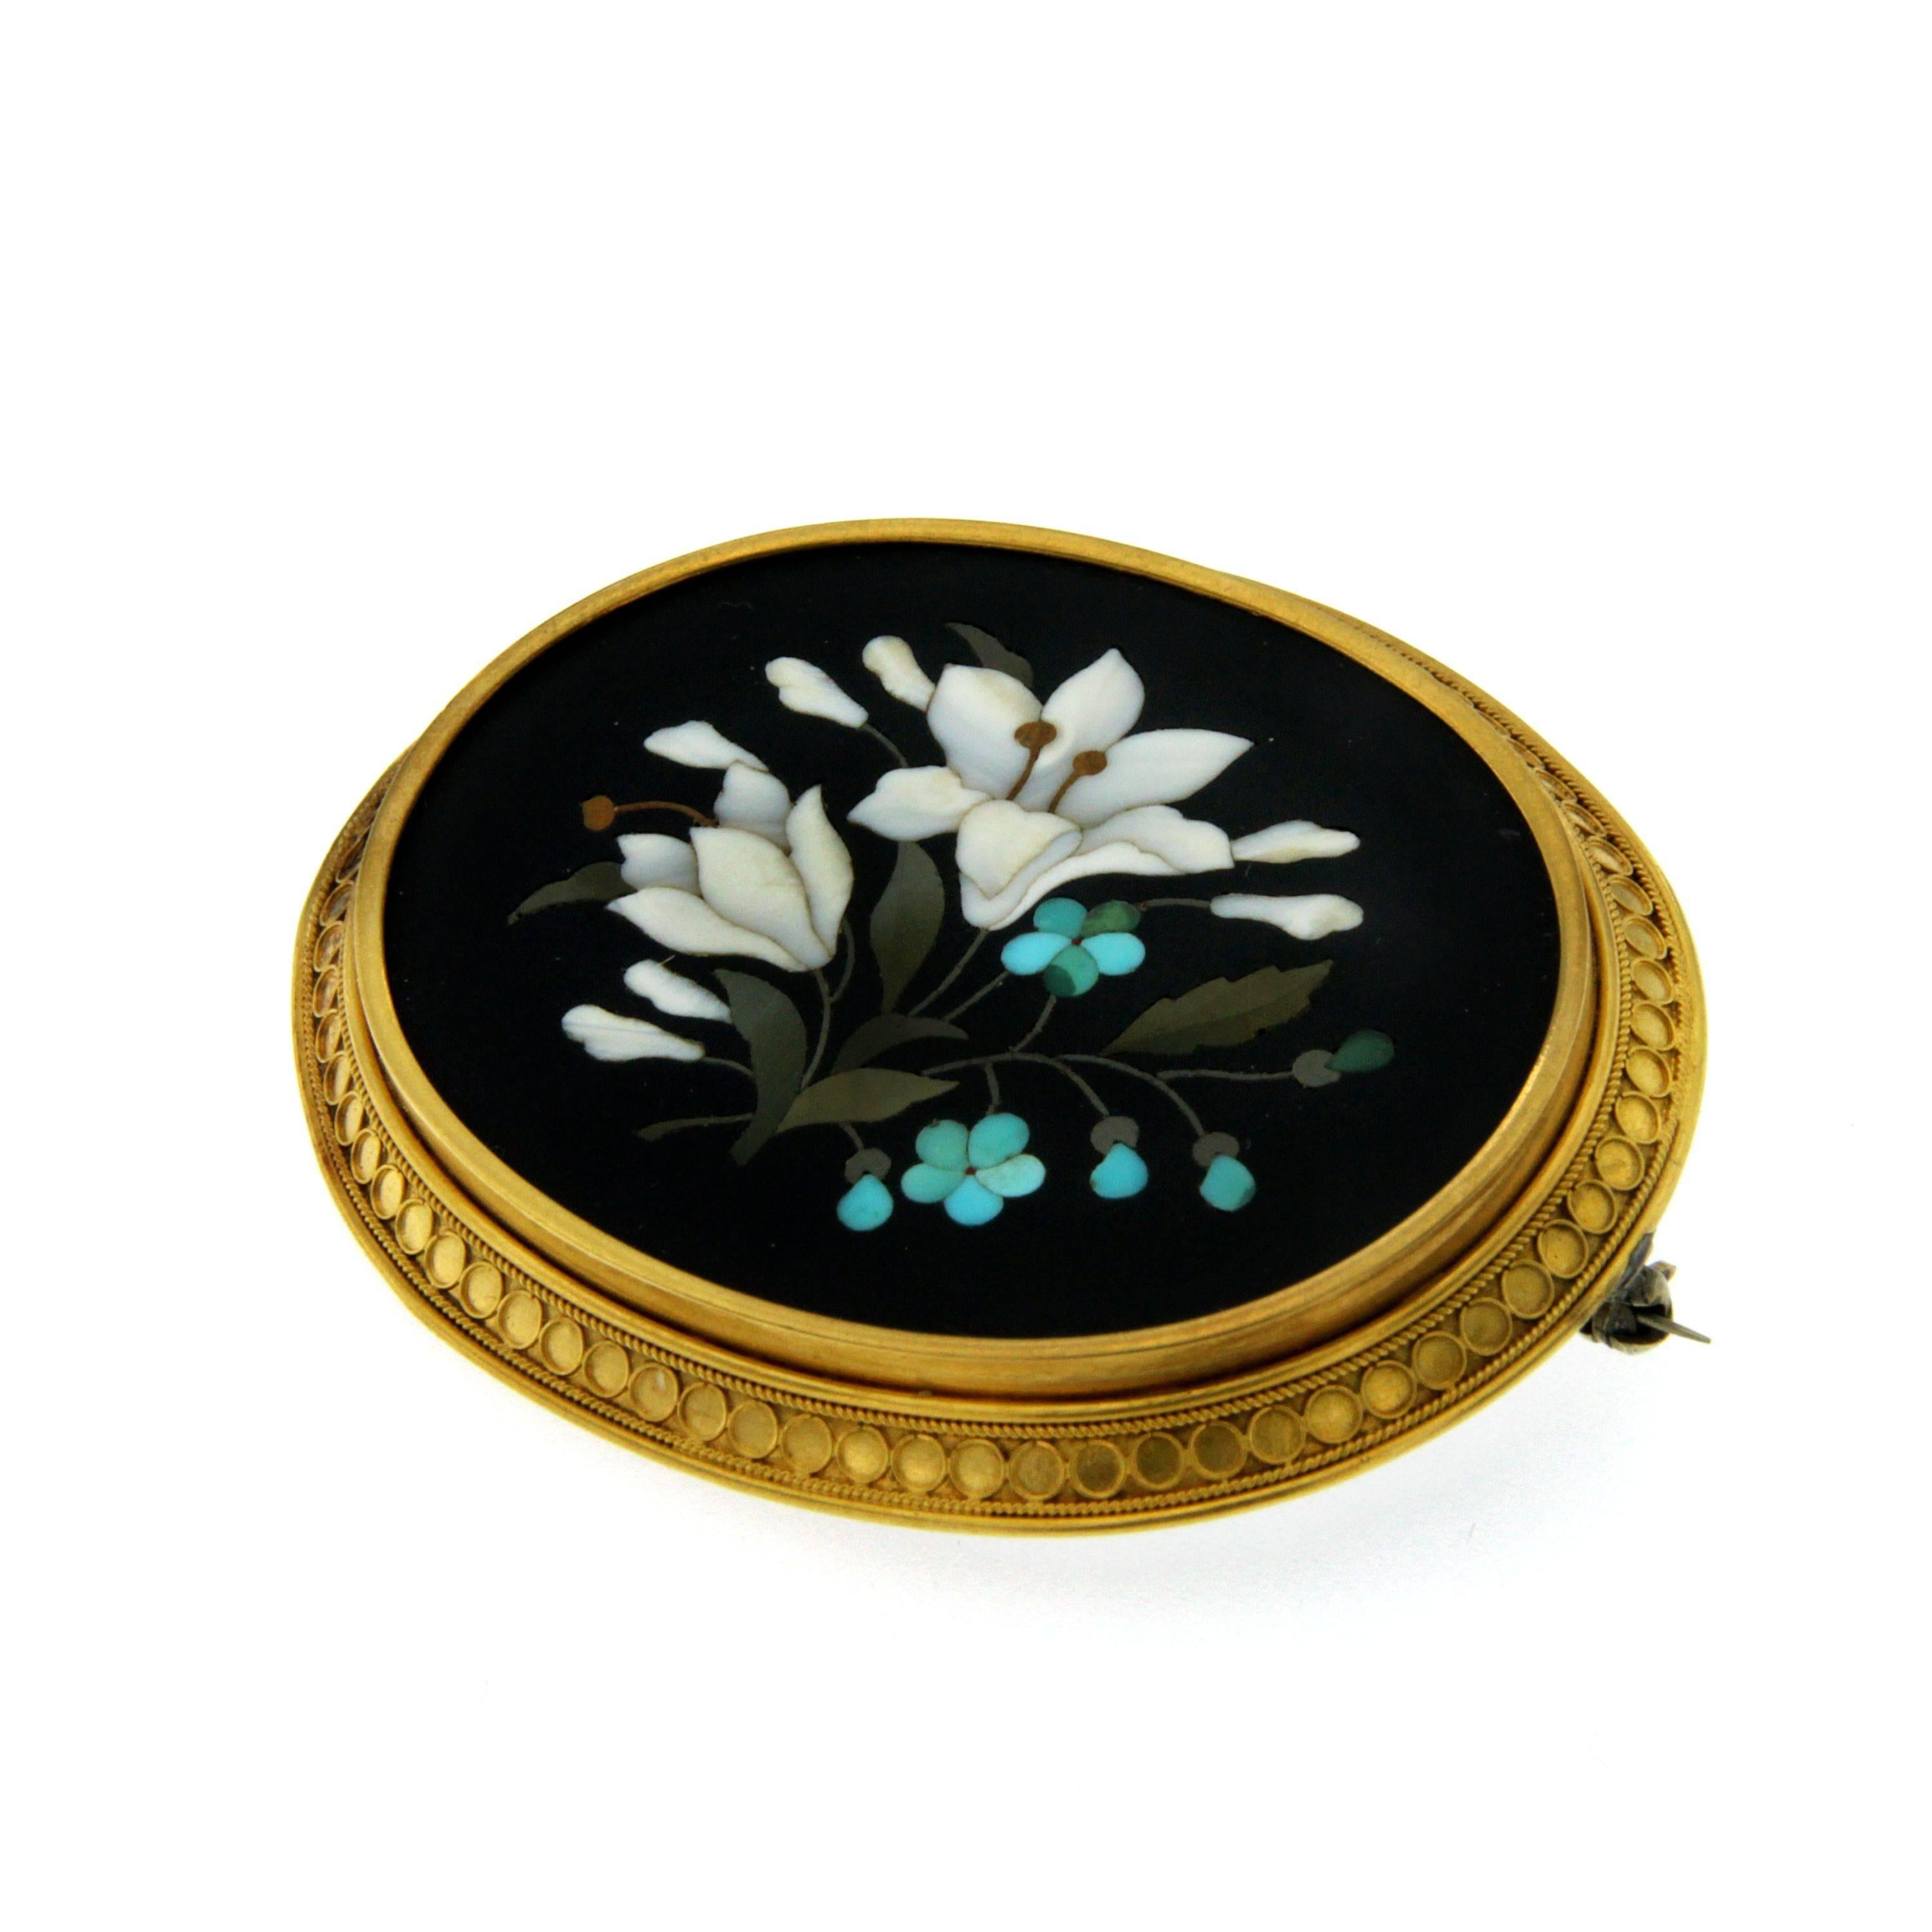 A  gorgeous  Mosaic set of earrings and brooch mounted in 18k yellow gold.
The brooch and the earrings feature a flower bouquet, on black ground within reeded bordered setting.
The brooch has a locking c-clasp fastener.
The craftmanship on this